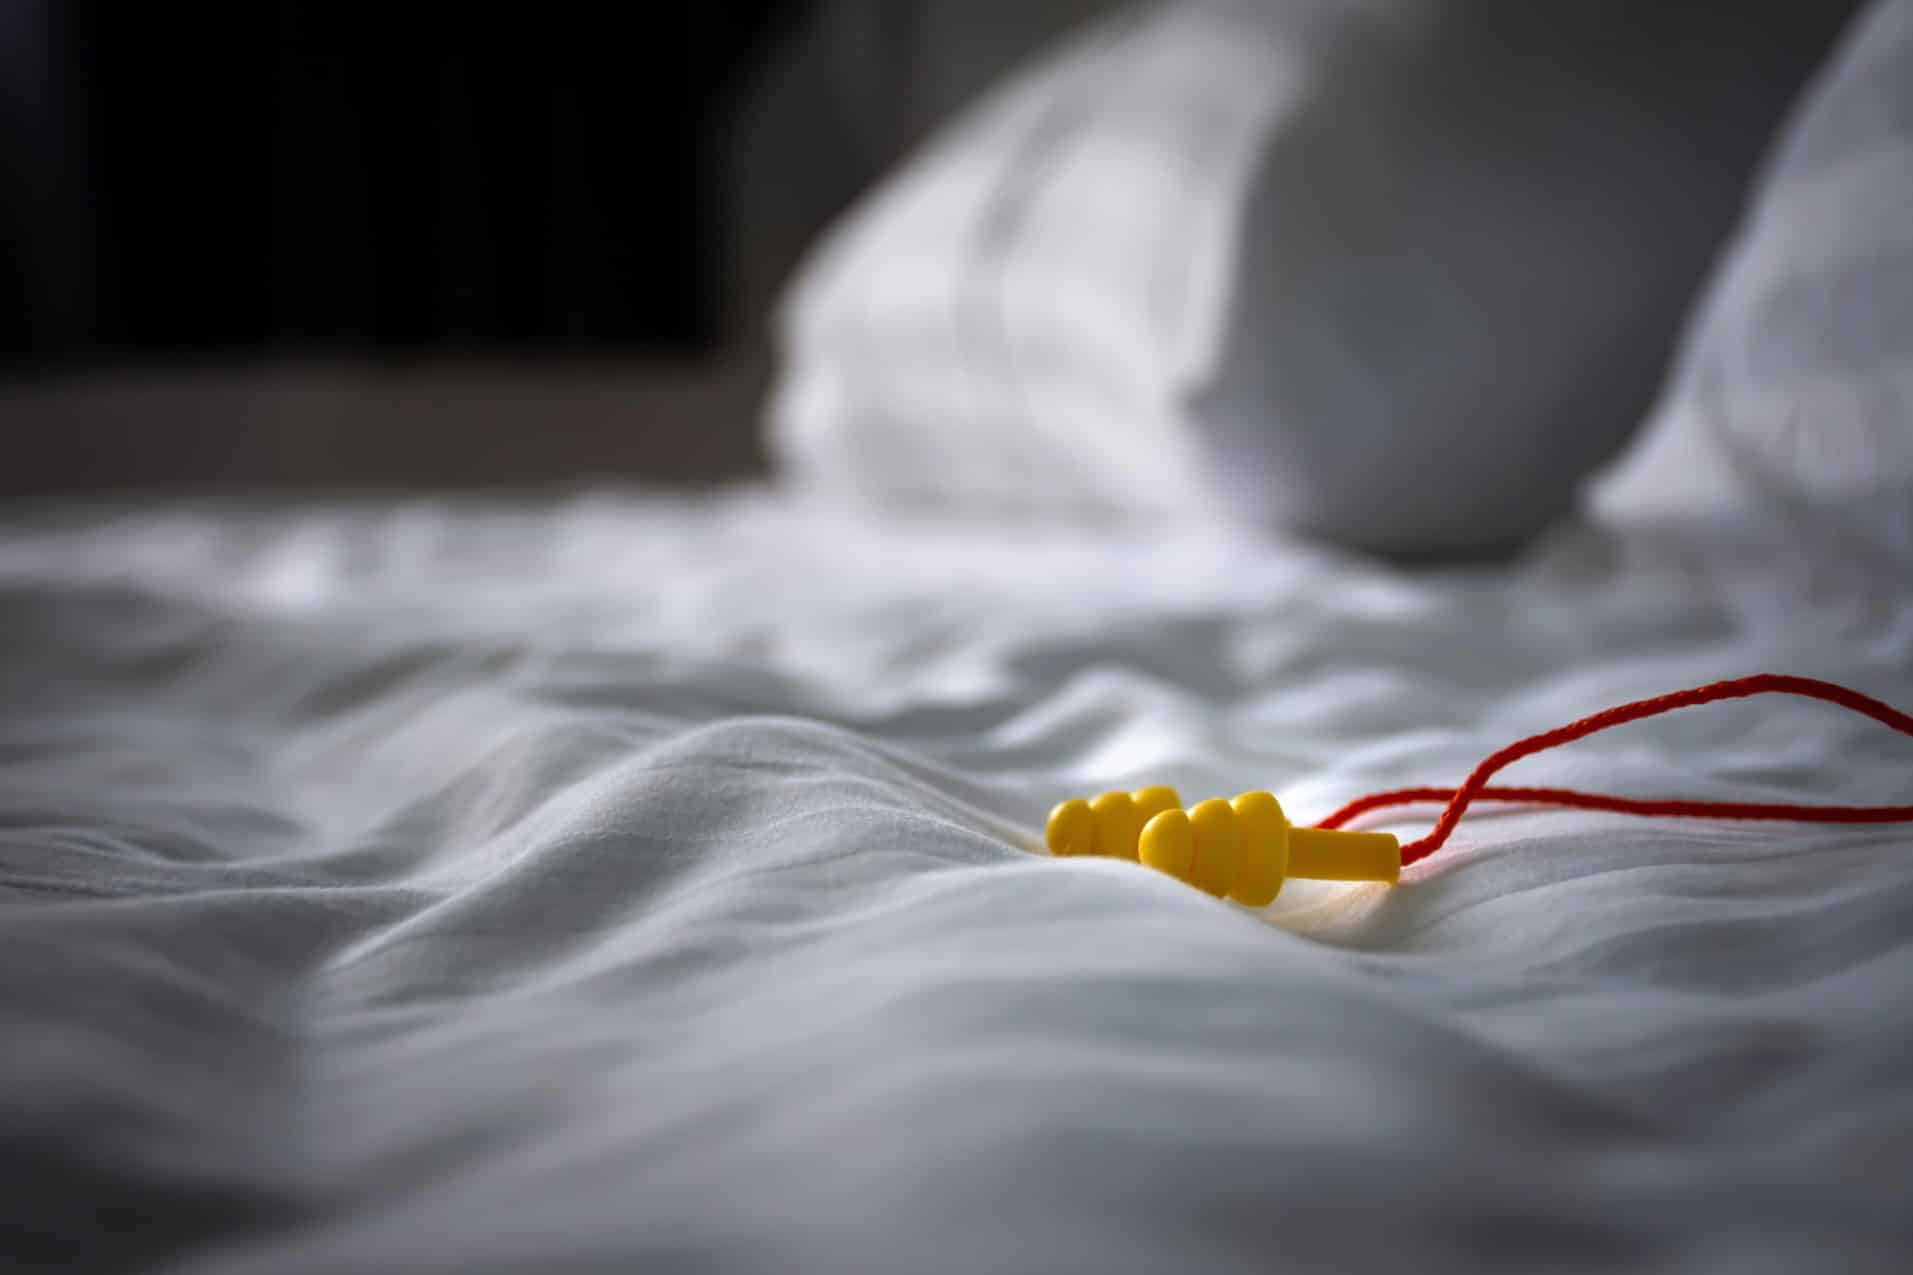 Can a well-positioned tennis ball help prevent snoring?, Sleep